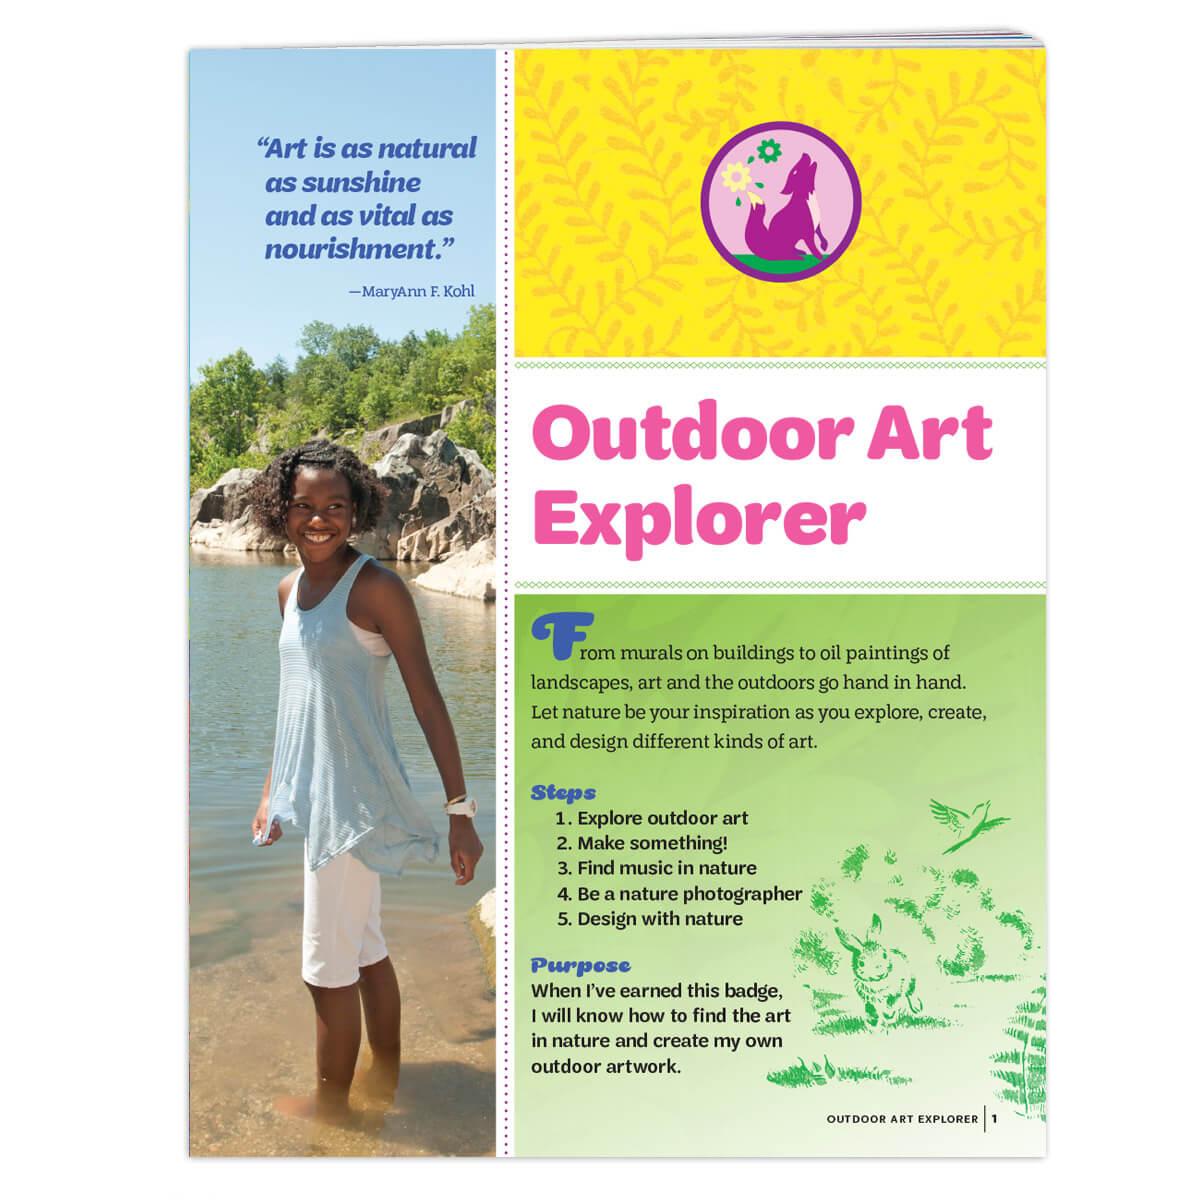 Craft Knife: Every Council's Own Girl Scout Fun Patch Program That Your  Girl Scouts Can Earn from Anywhere: Arts and Crafts